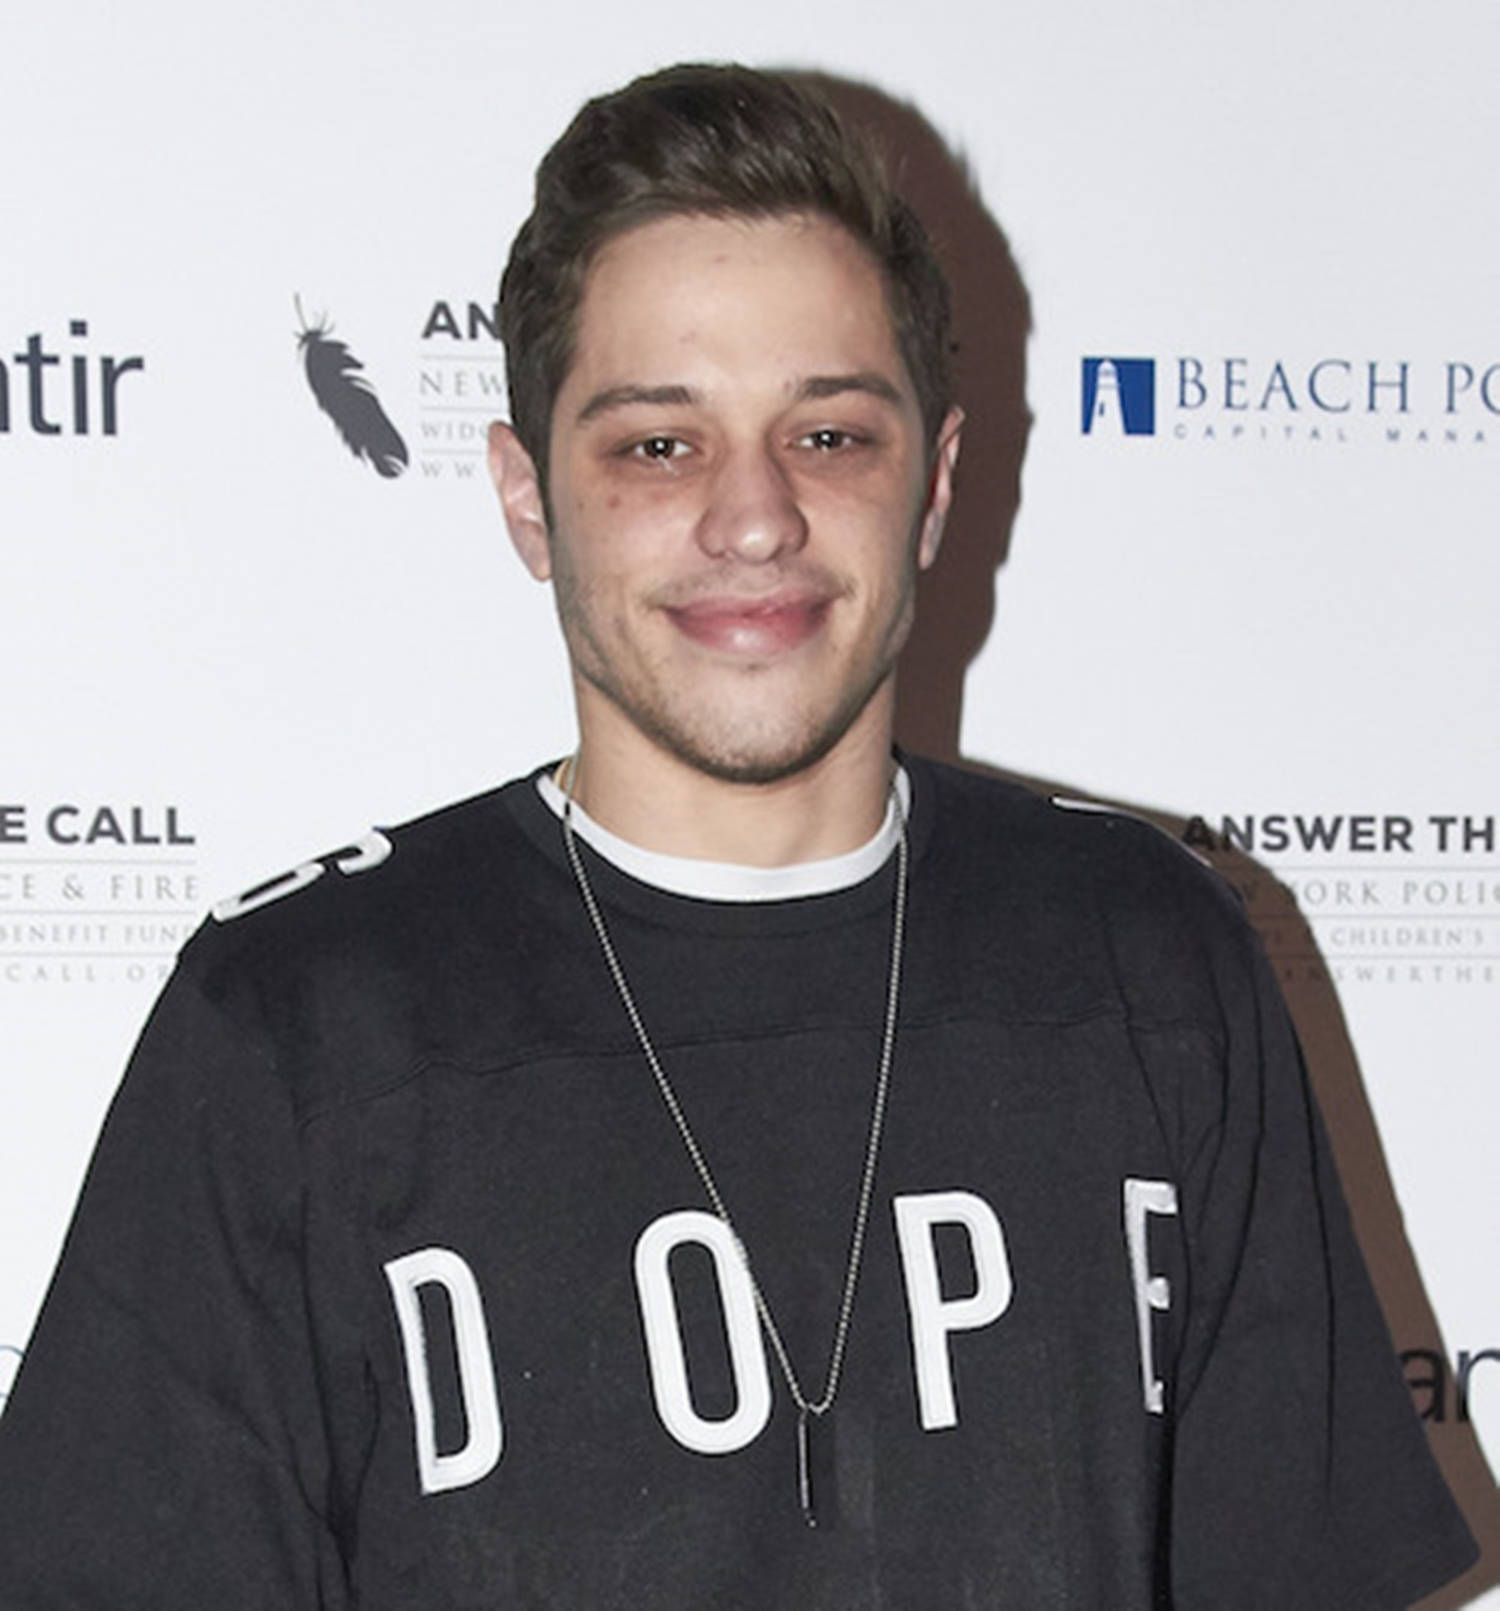 Pete Davidson Answer The Call Event Background